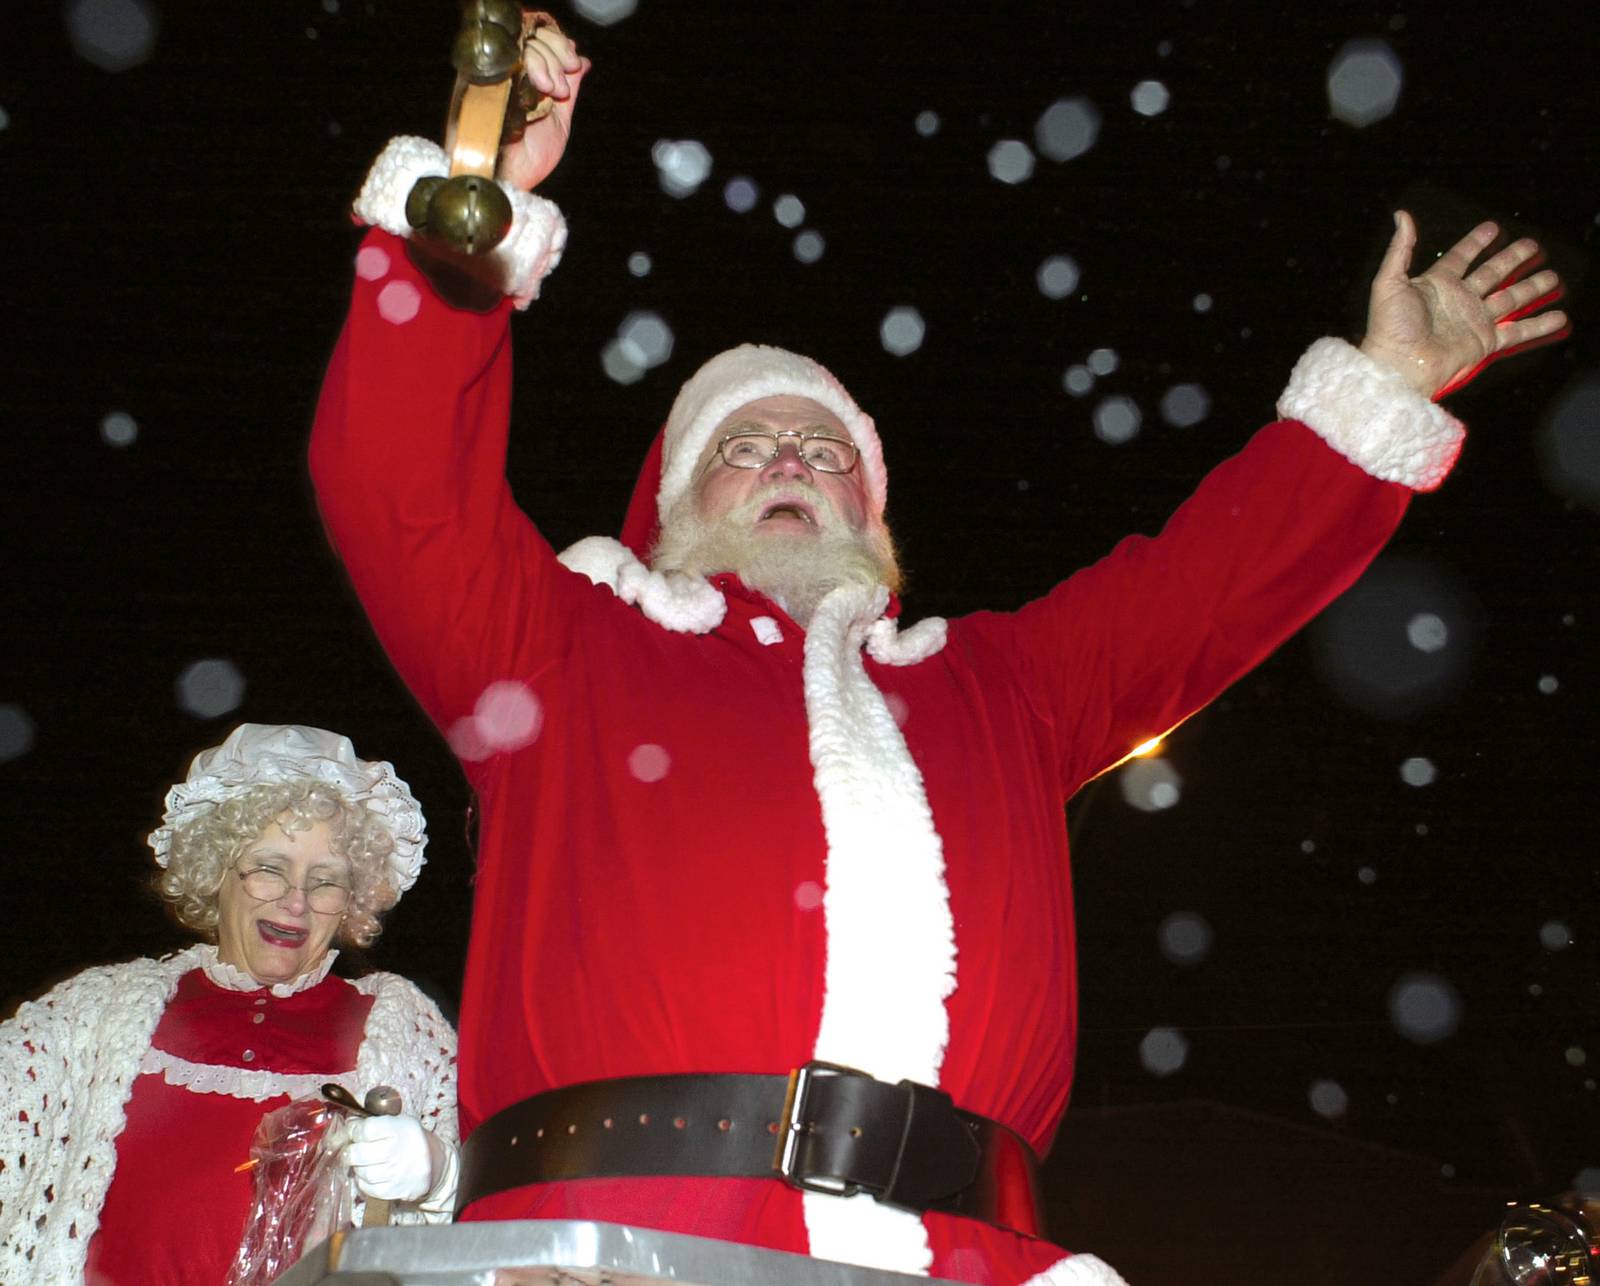 Christmas Stroll returning to downtown Elburn Shaw Local